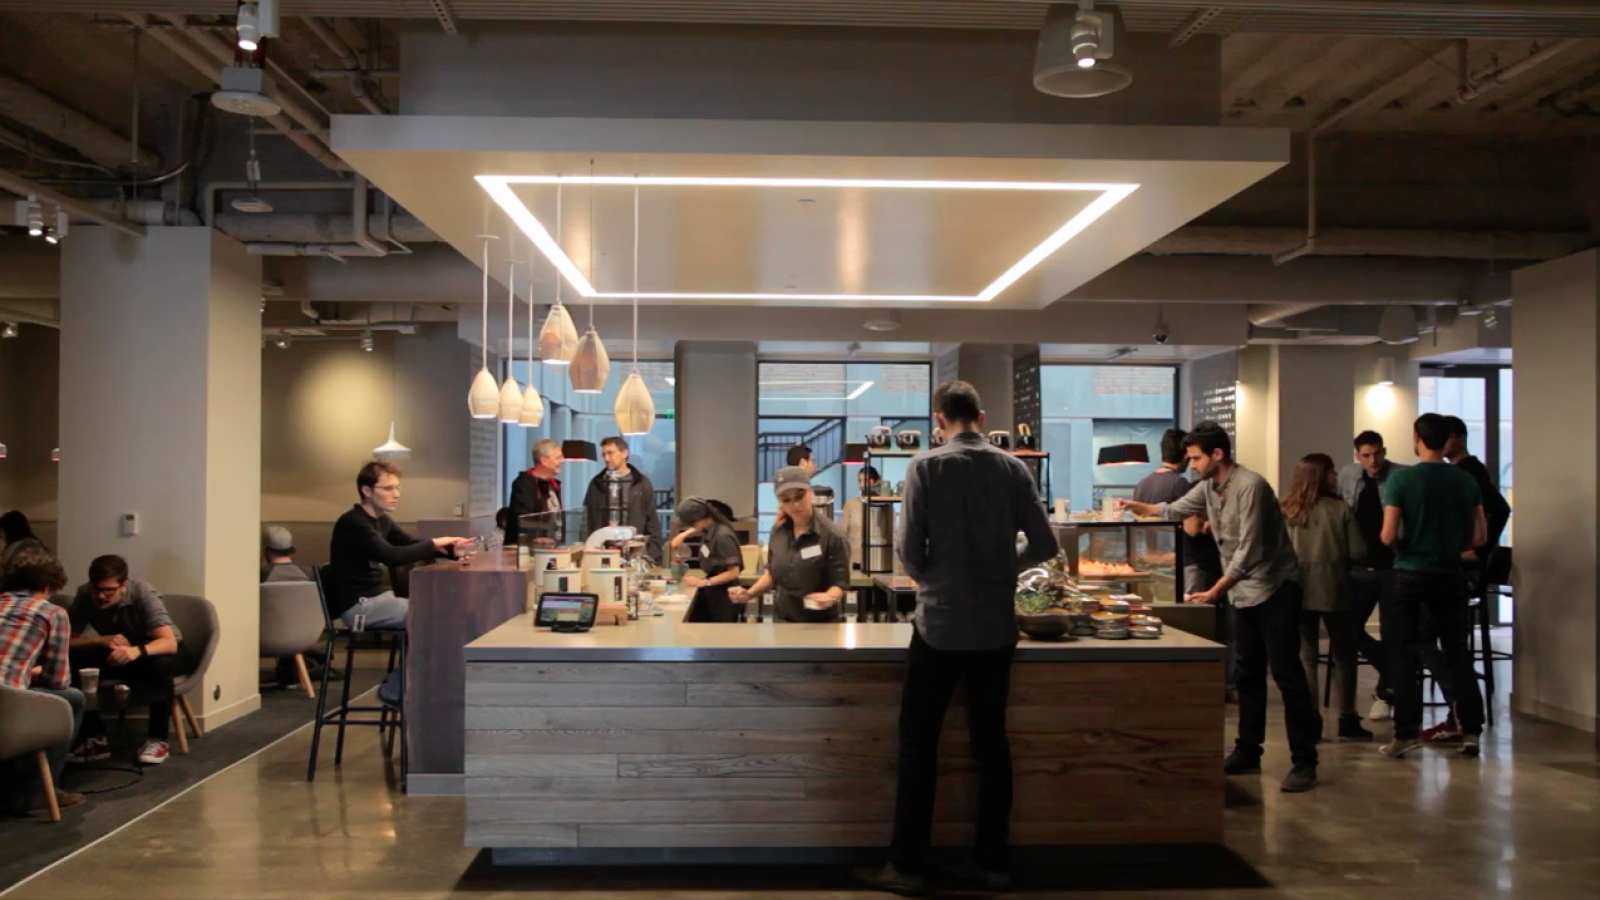 What can you learn from Google’s Conscious Café?